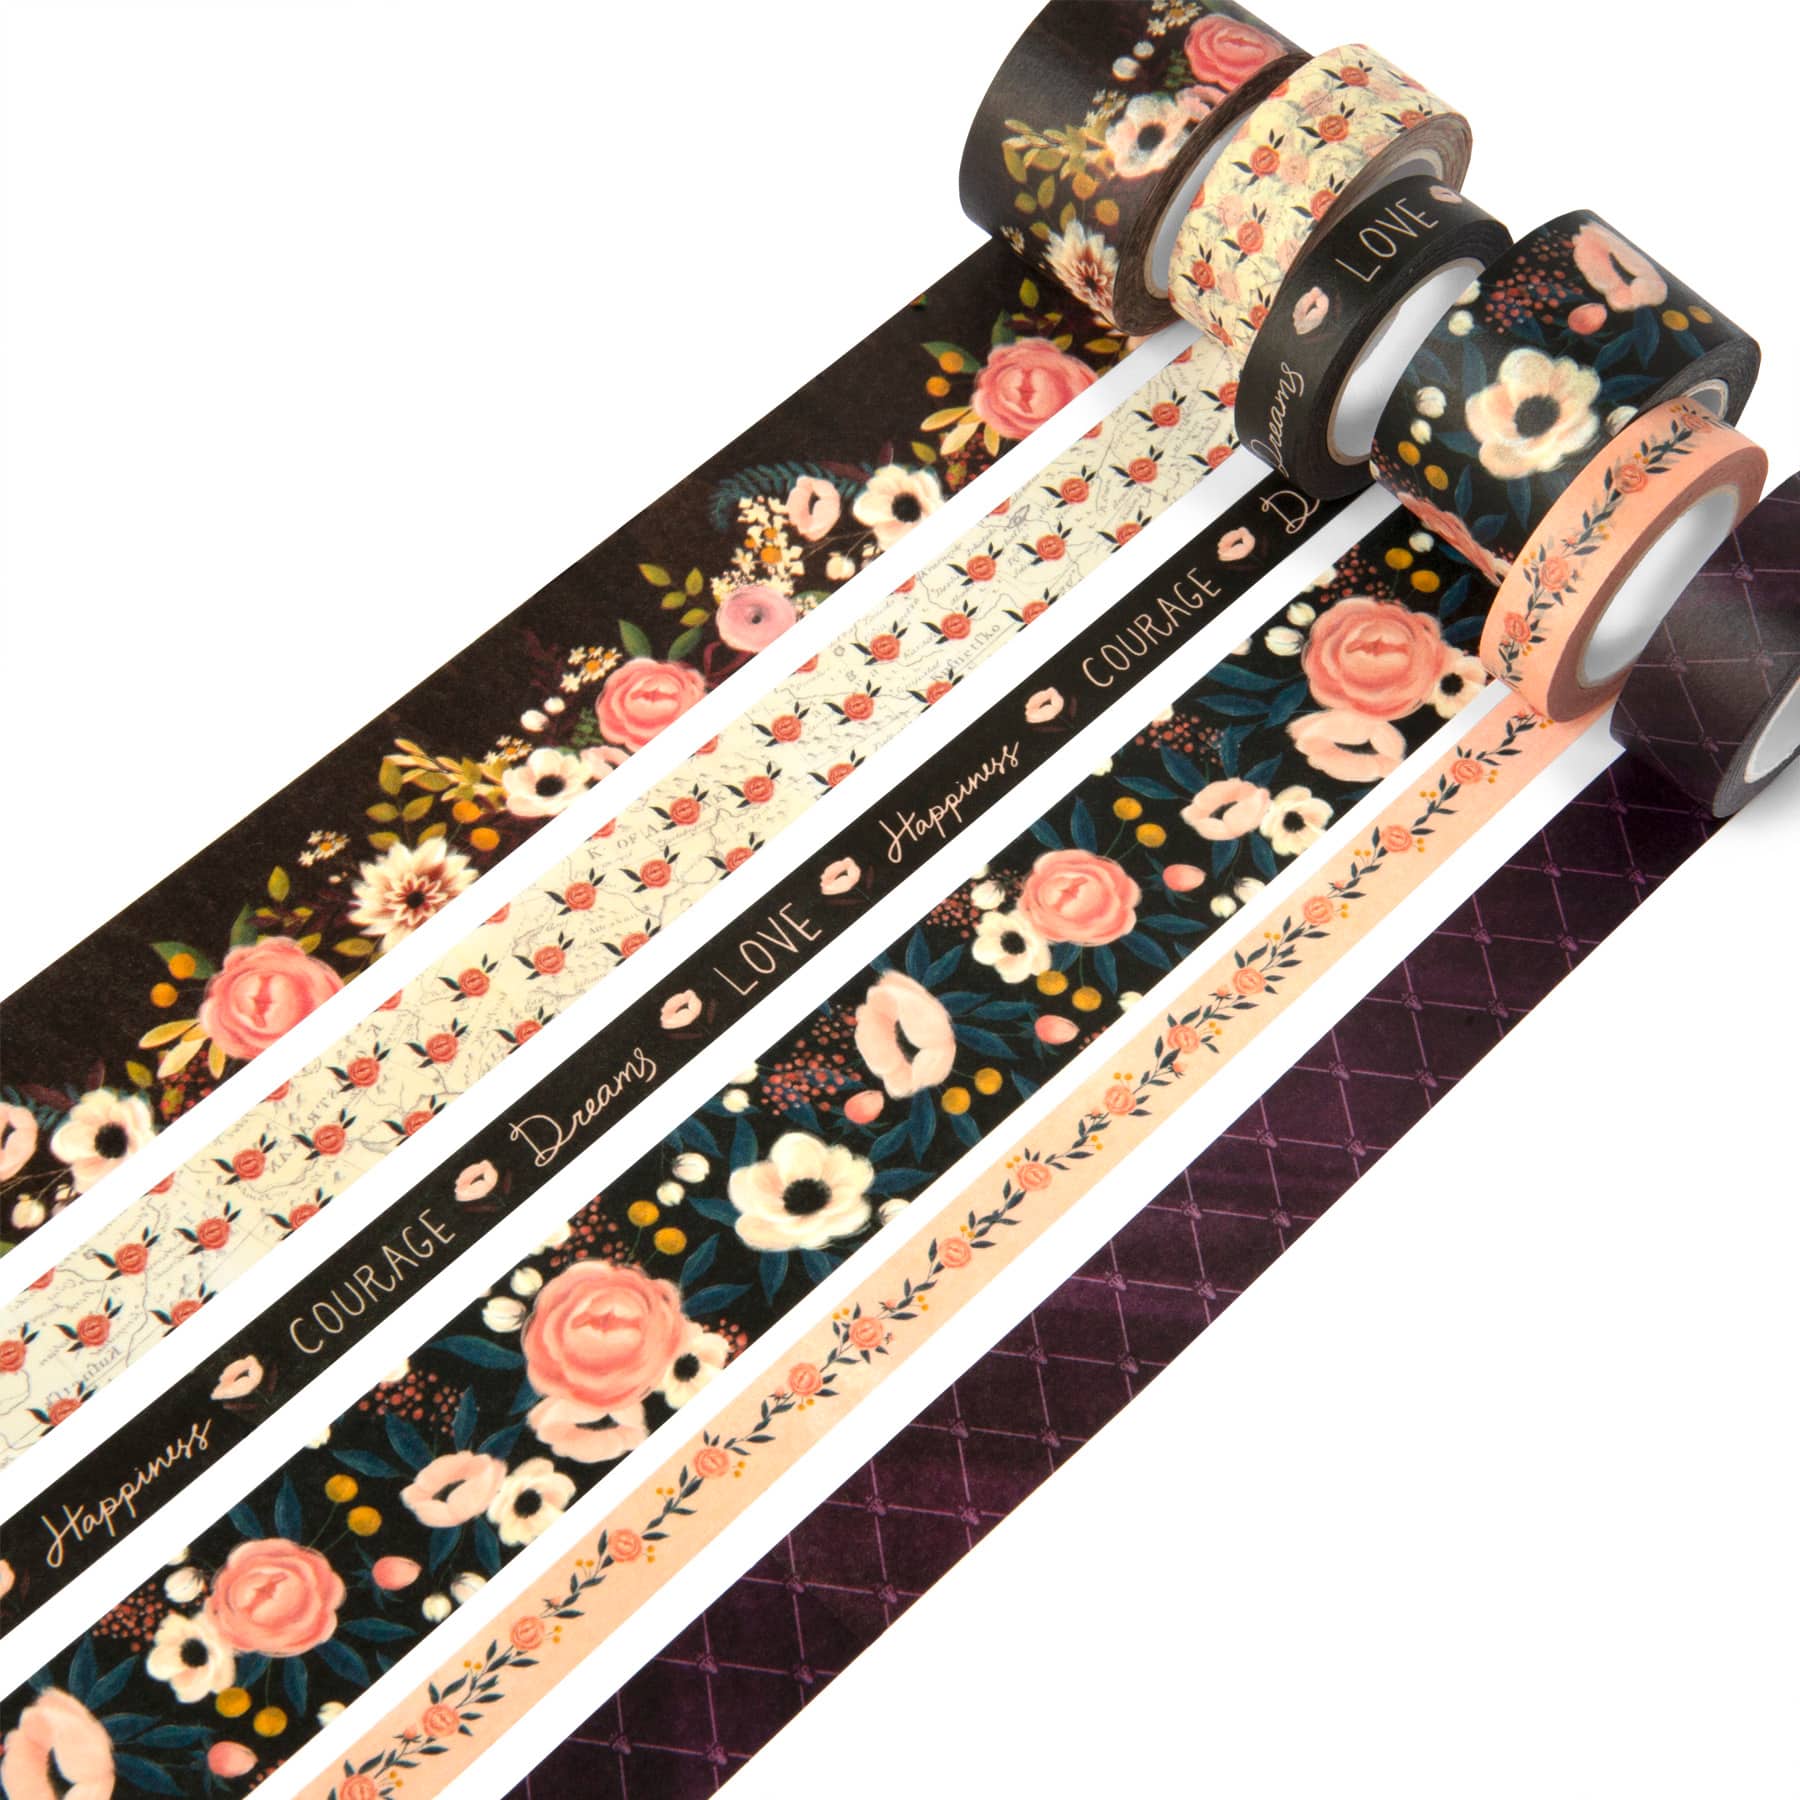 Recollections michaels black floral crafting tape set by recollections